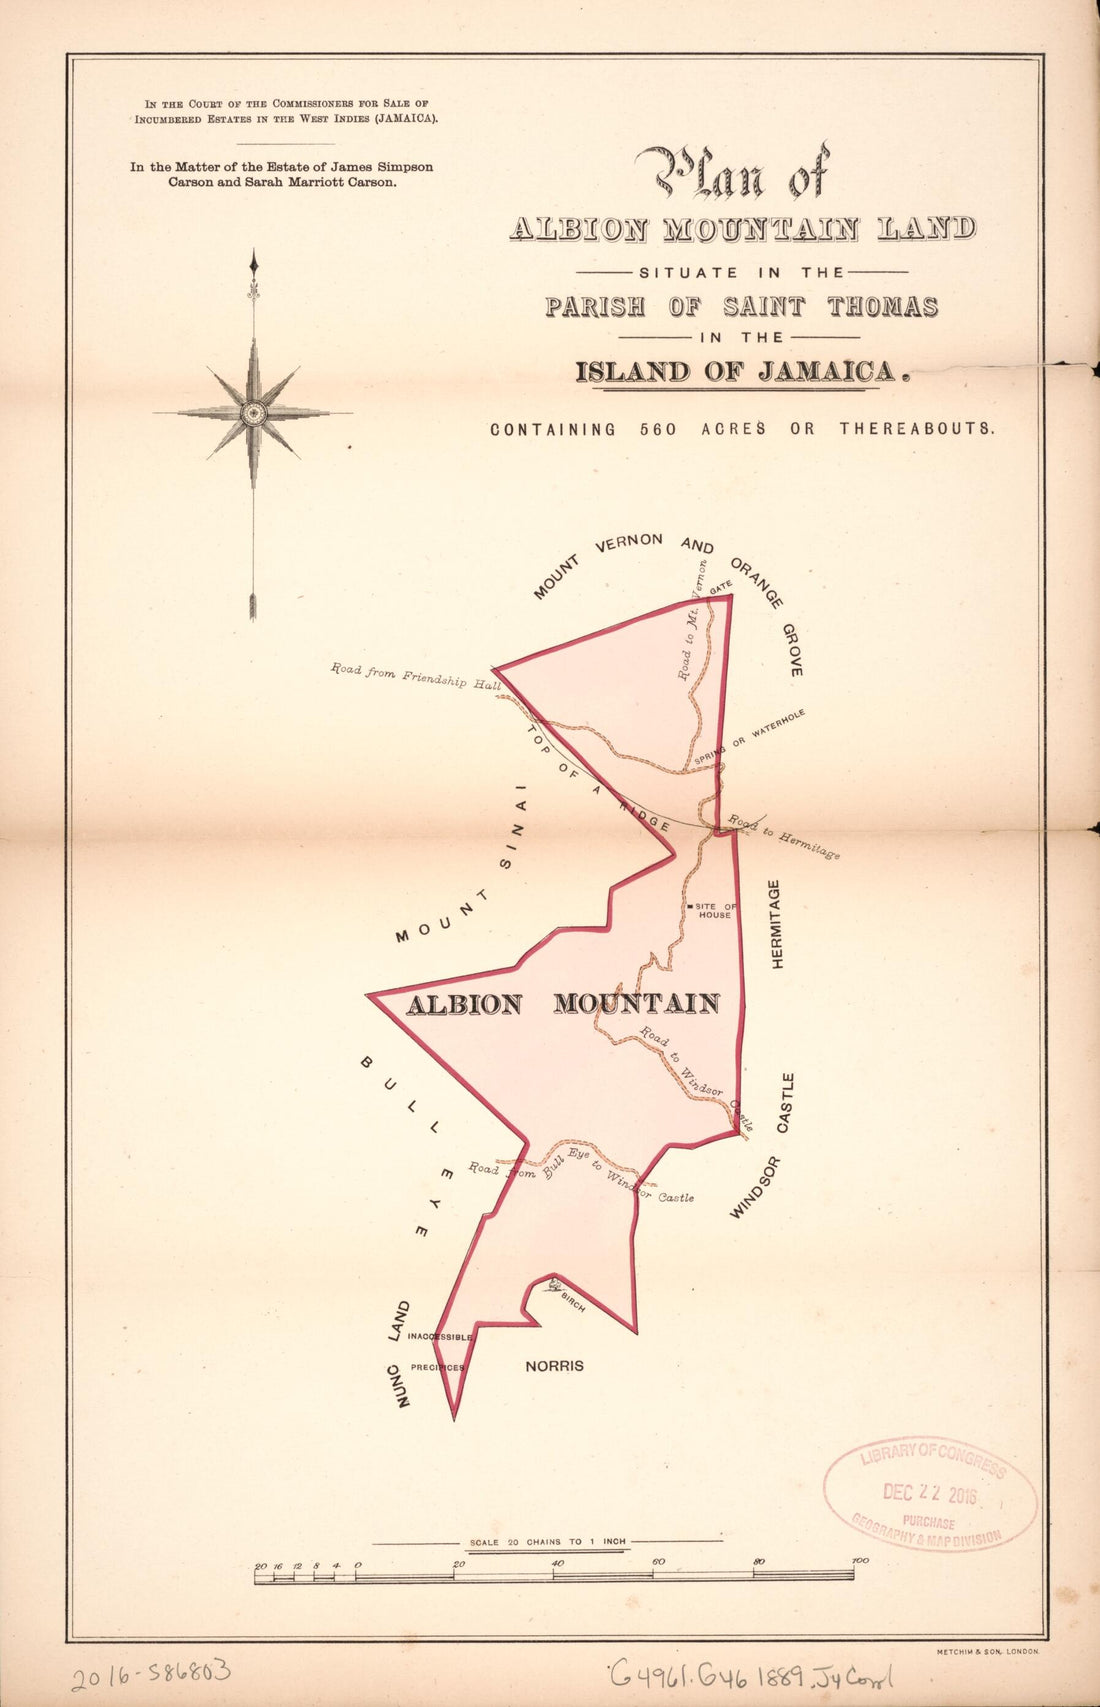 This old map of Plan of Albion Mountain Land from Encumbered Estates In the West Indies (Jamaica) from 1889 was created by W. W. Jenkinson in 1889